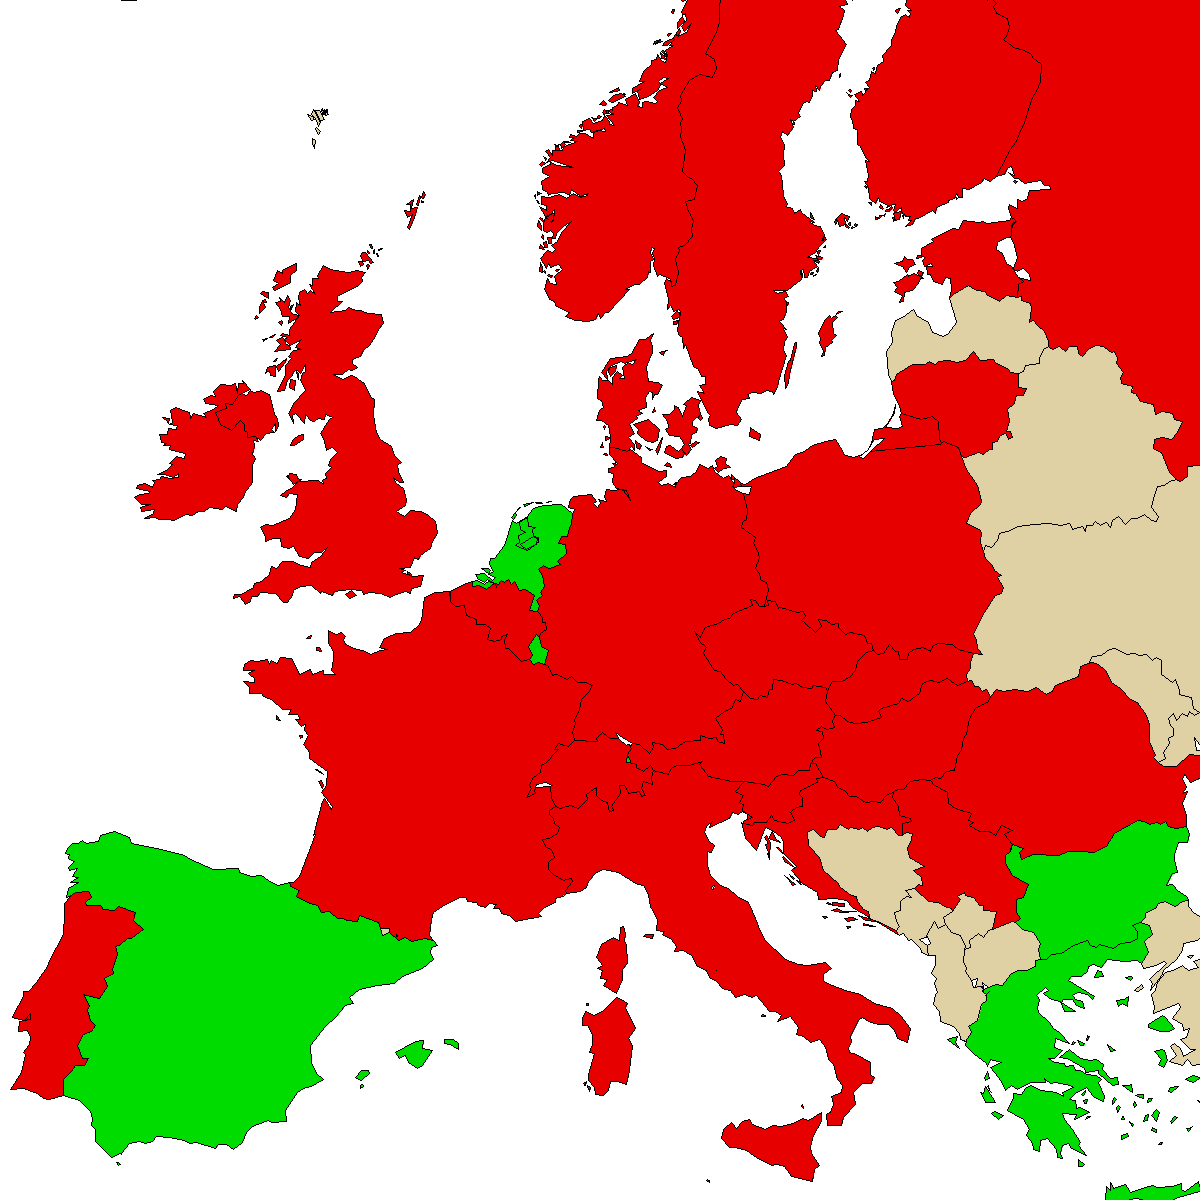 legal info map for our product 3MMC, green are countries with no ban, red with ban, gray is unknown